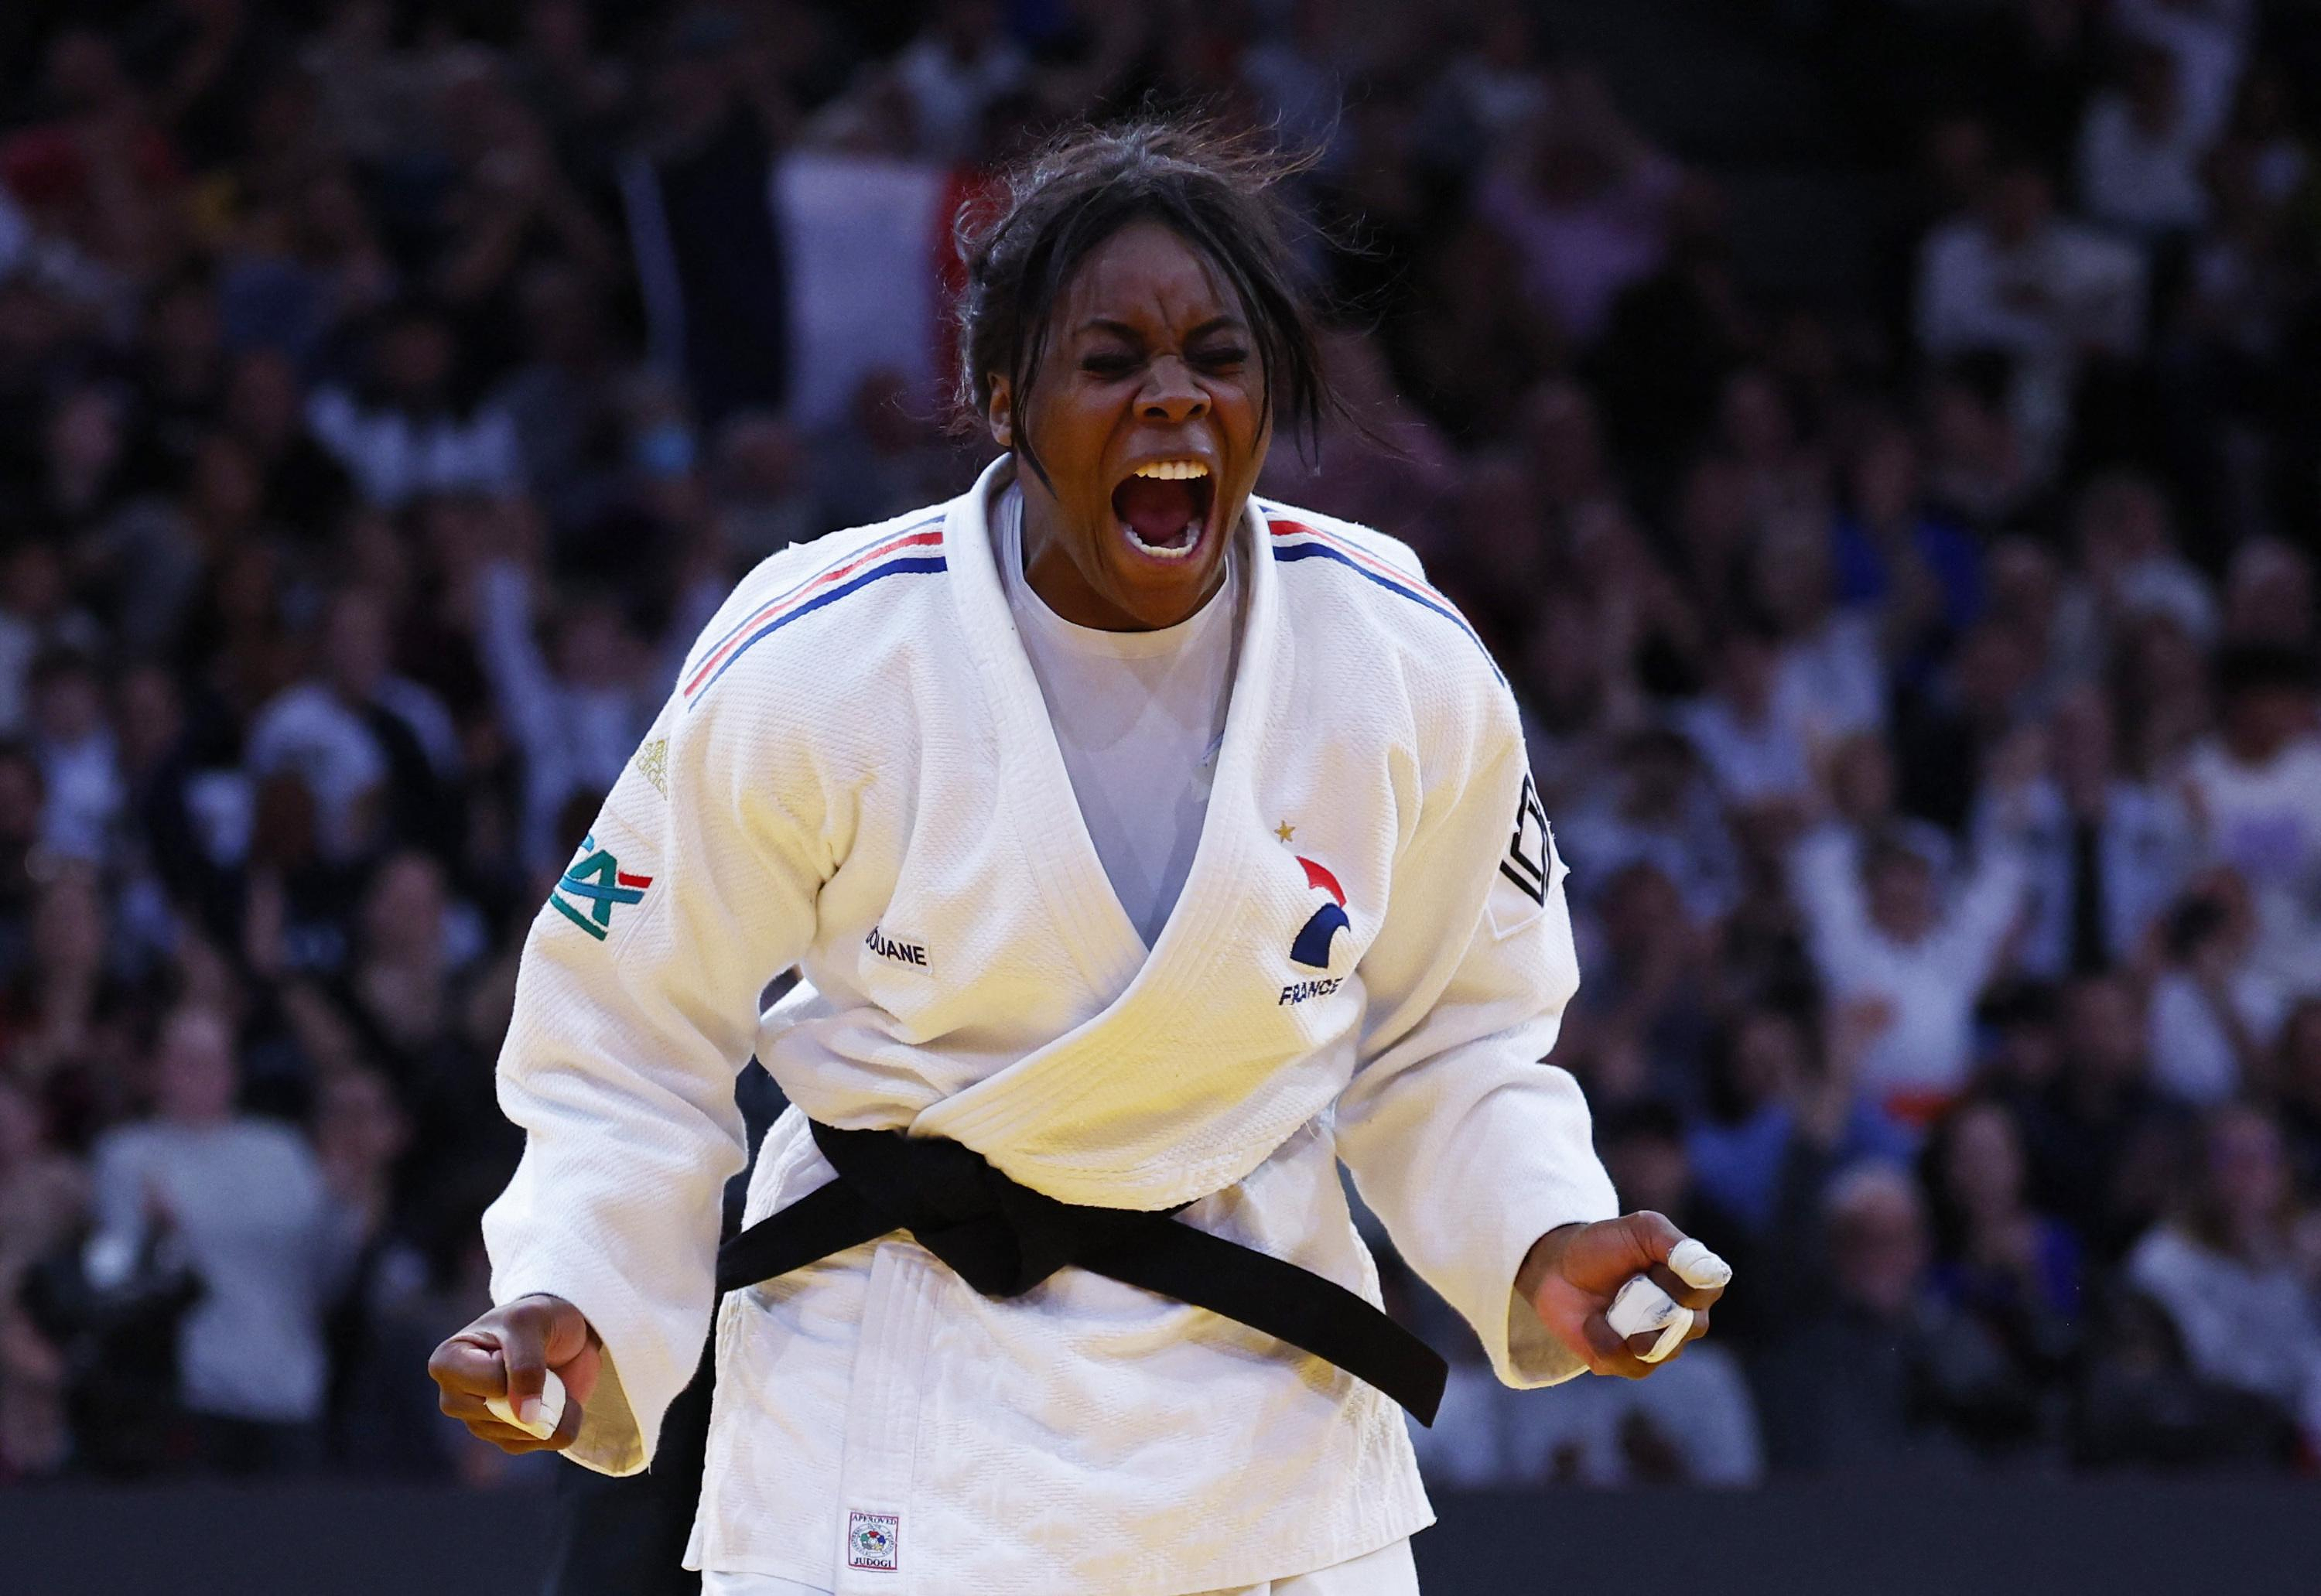 Madeleine Malonga: “Each person manages the competition as best they can”